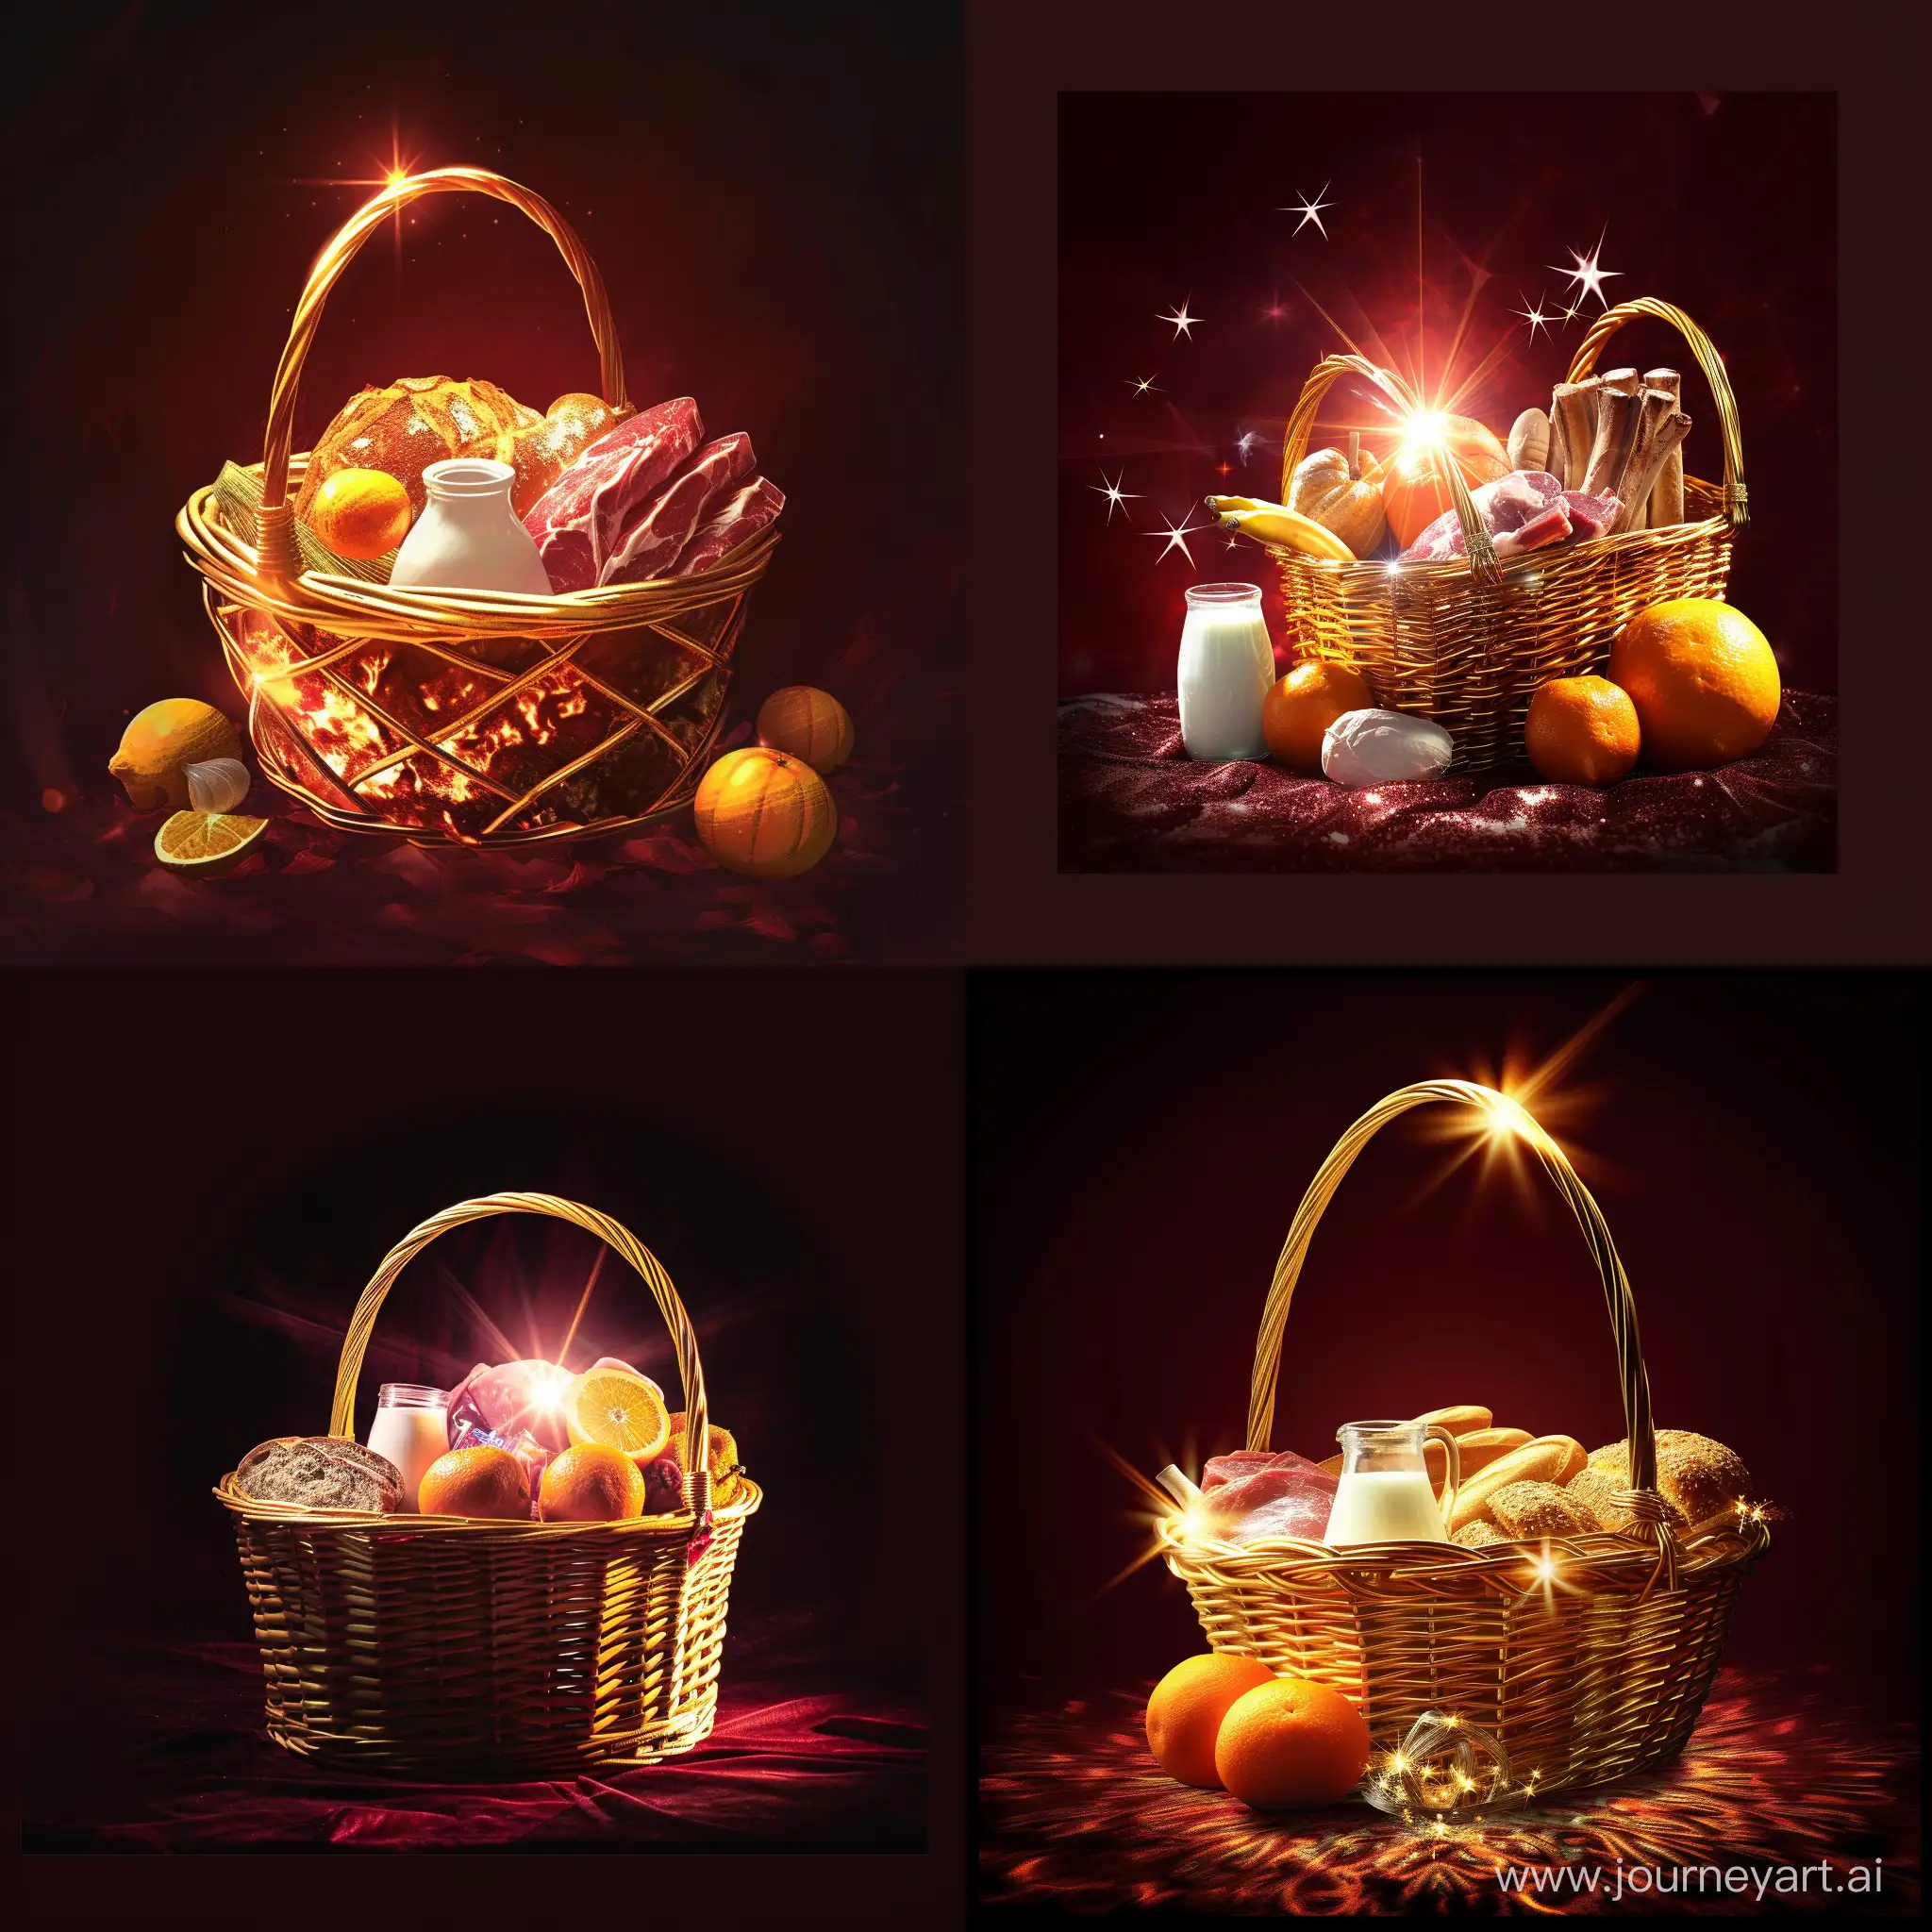 Luxurious-Golden-Basket-Overflowing-with-Fresh-Delicacies-on-Maroon-Background